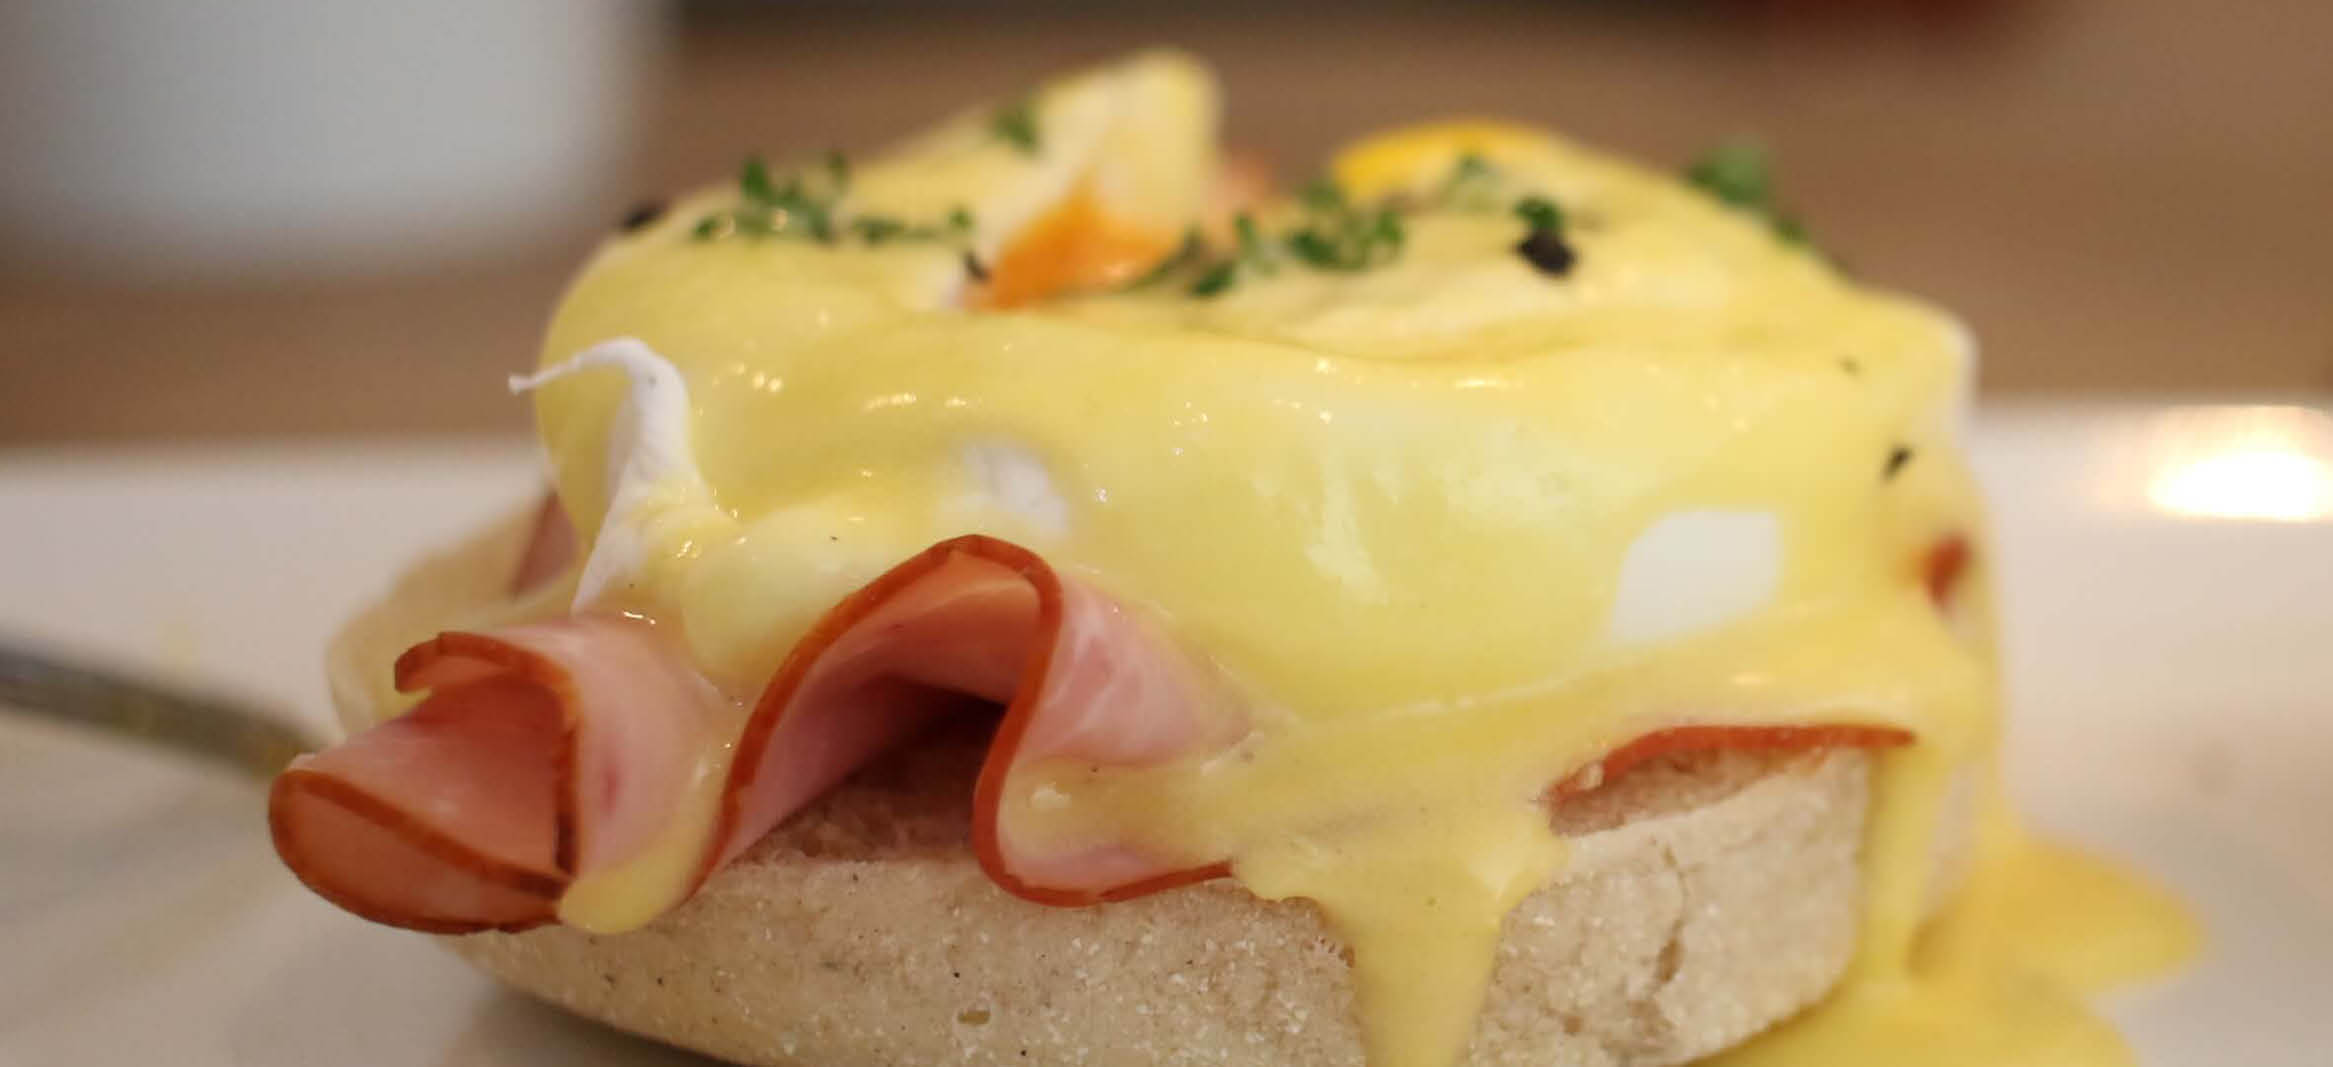 eggs benedict, brunch, surrey, guide to food and drink, where to go, brunch club